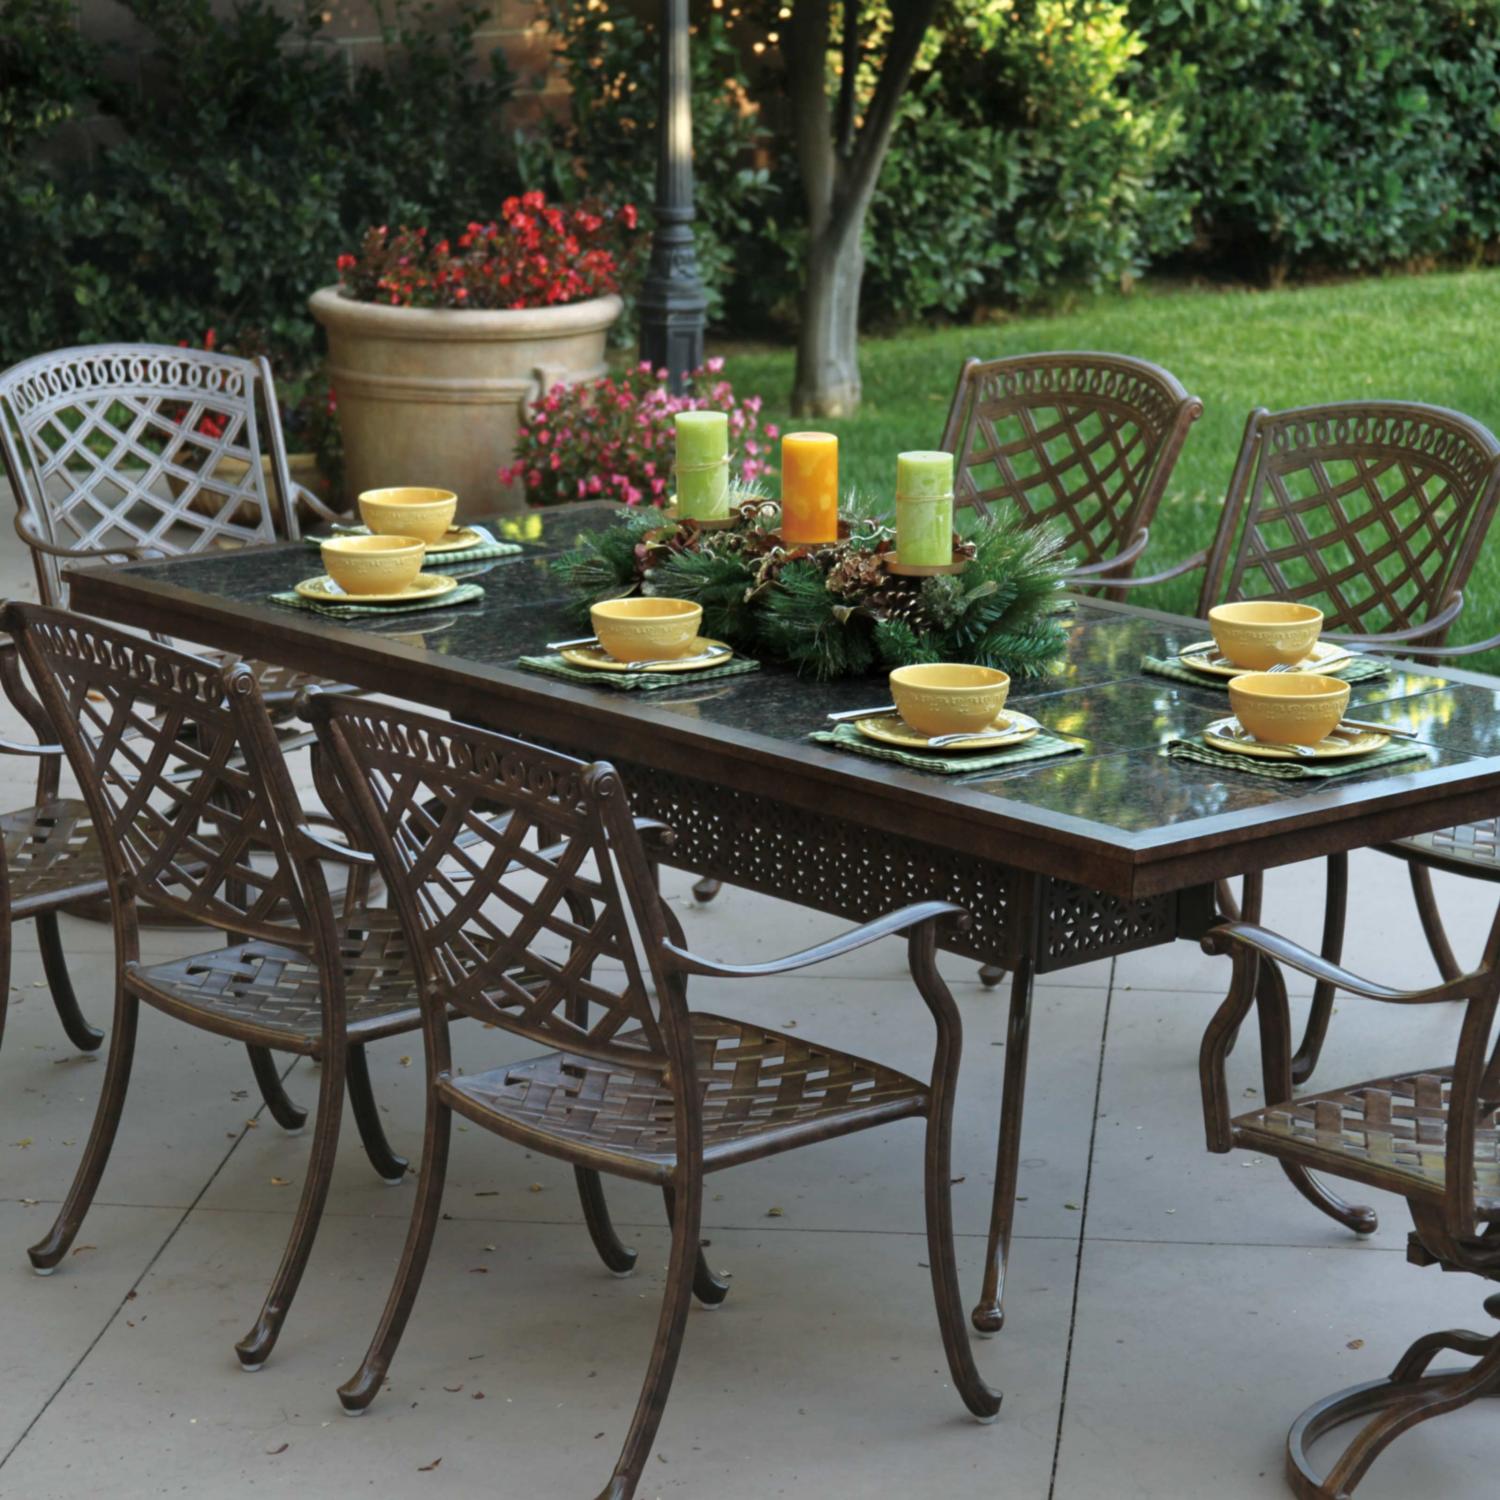 outdoor dining table granite photo - 3